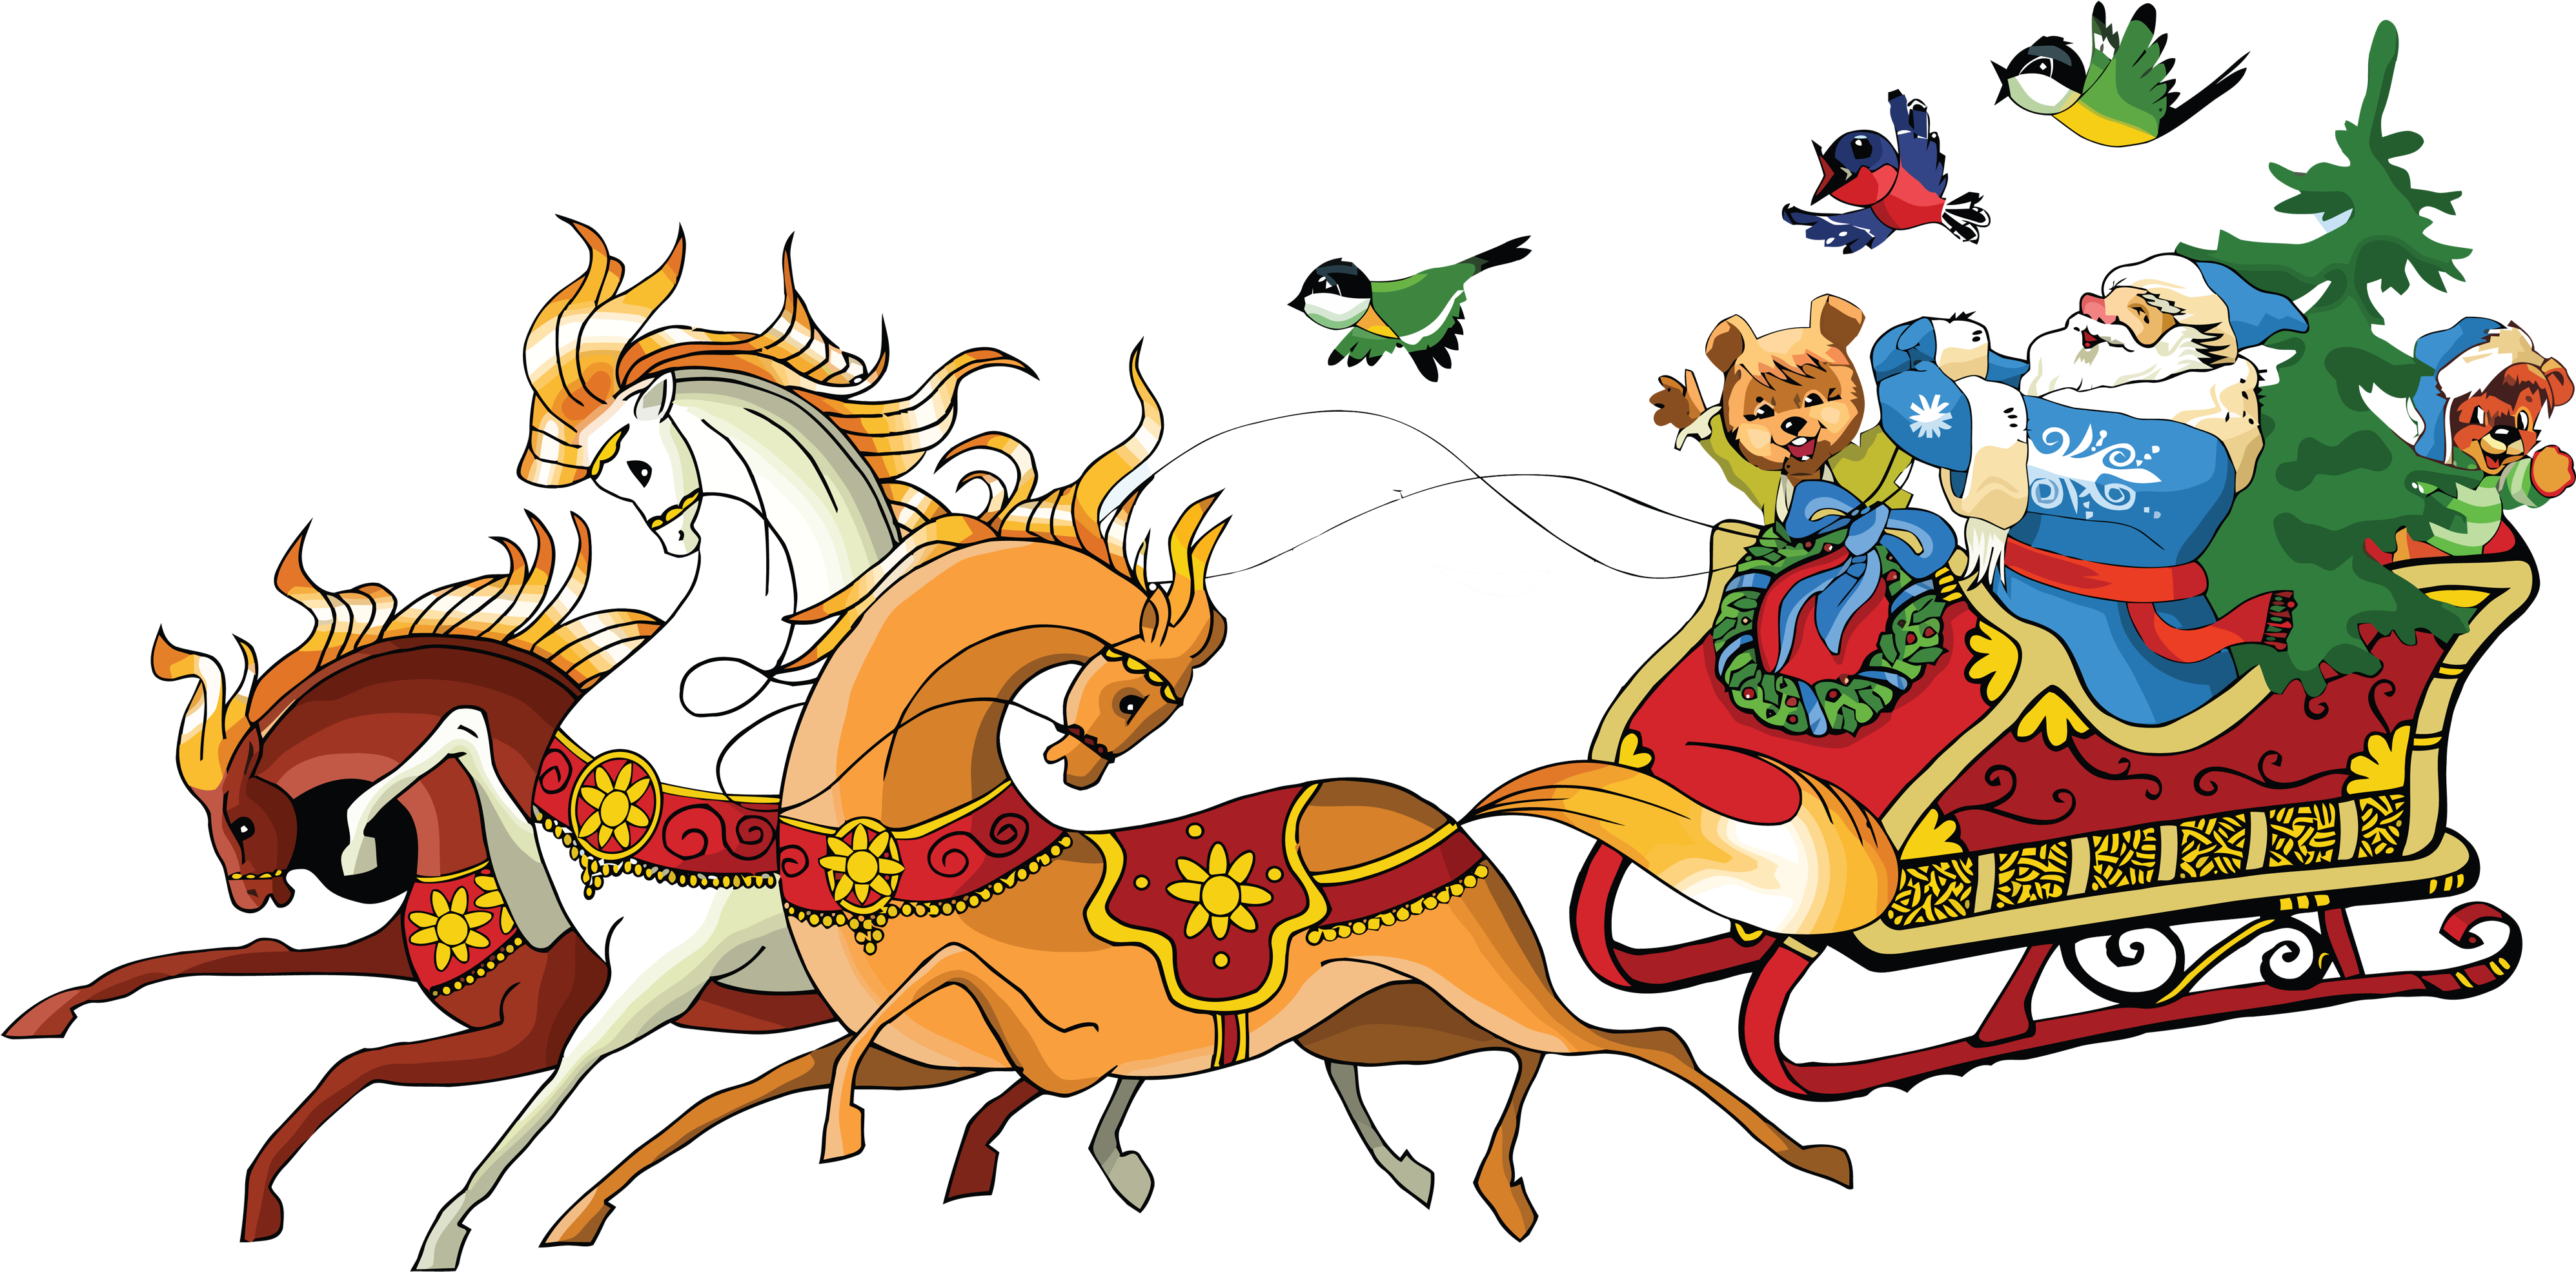 santa sleigh png image collection for download crazypngm crazy png images download 30476